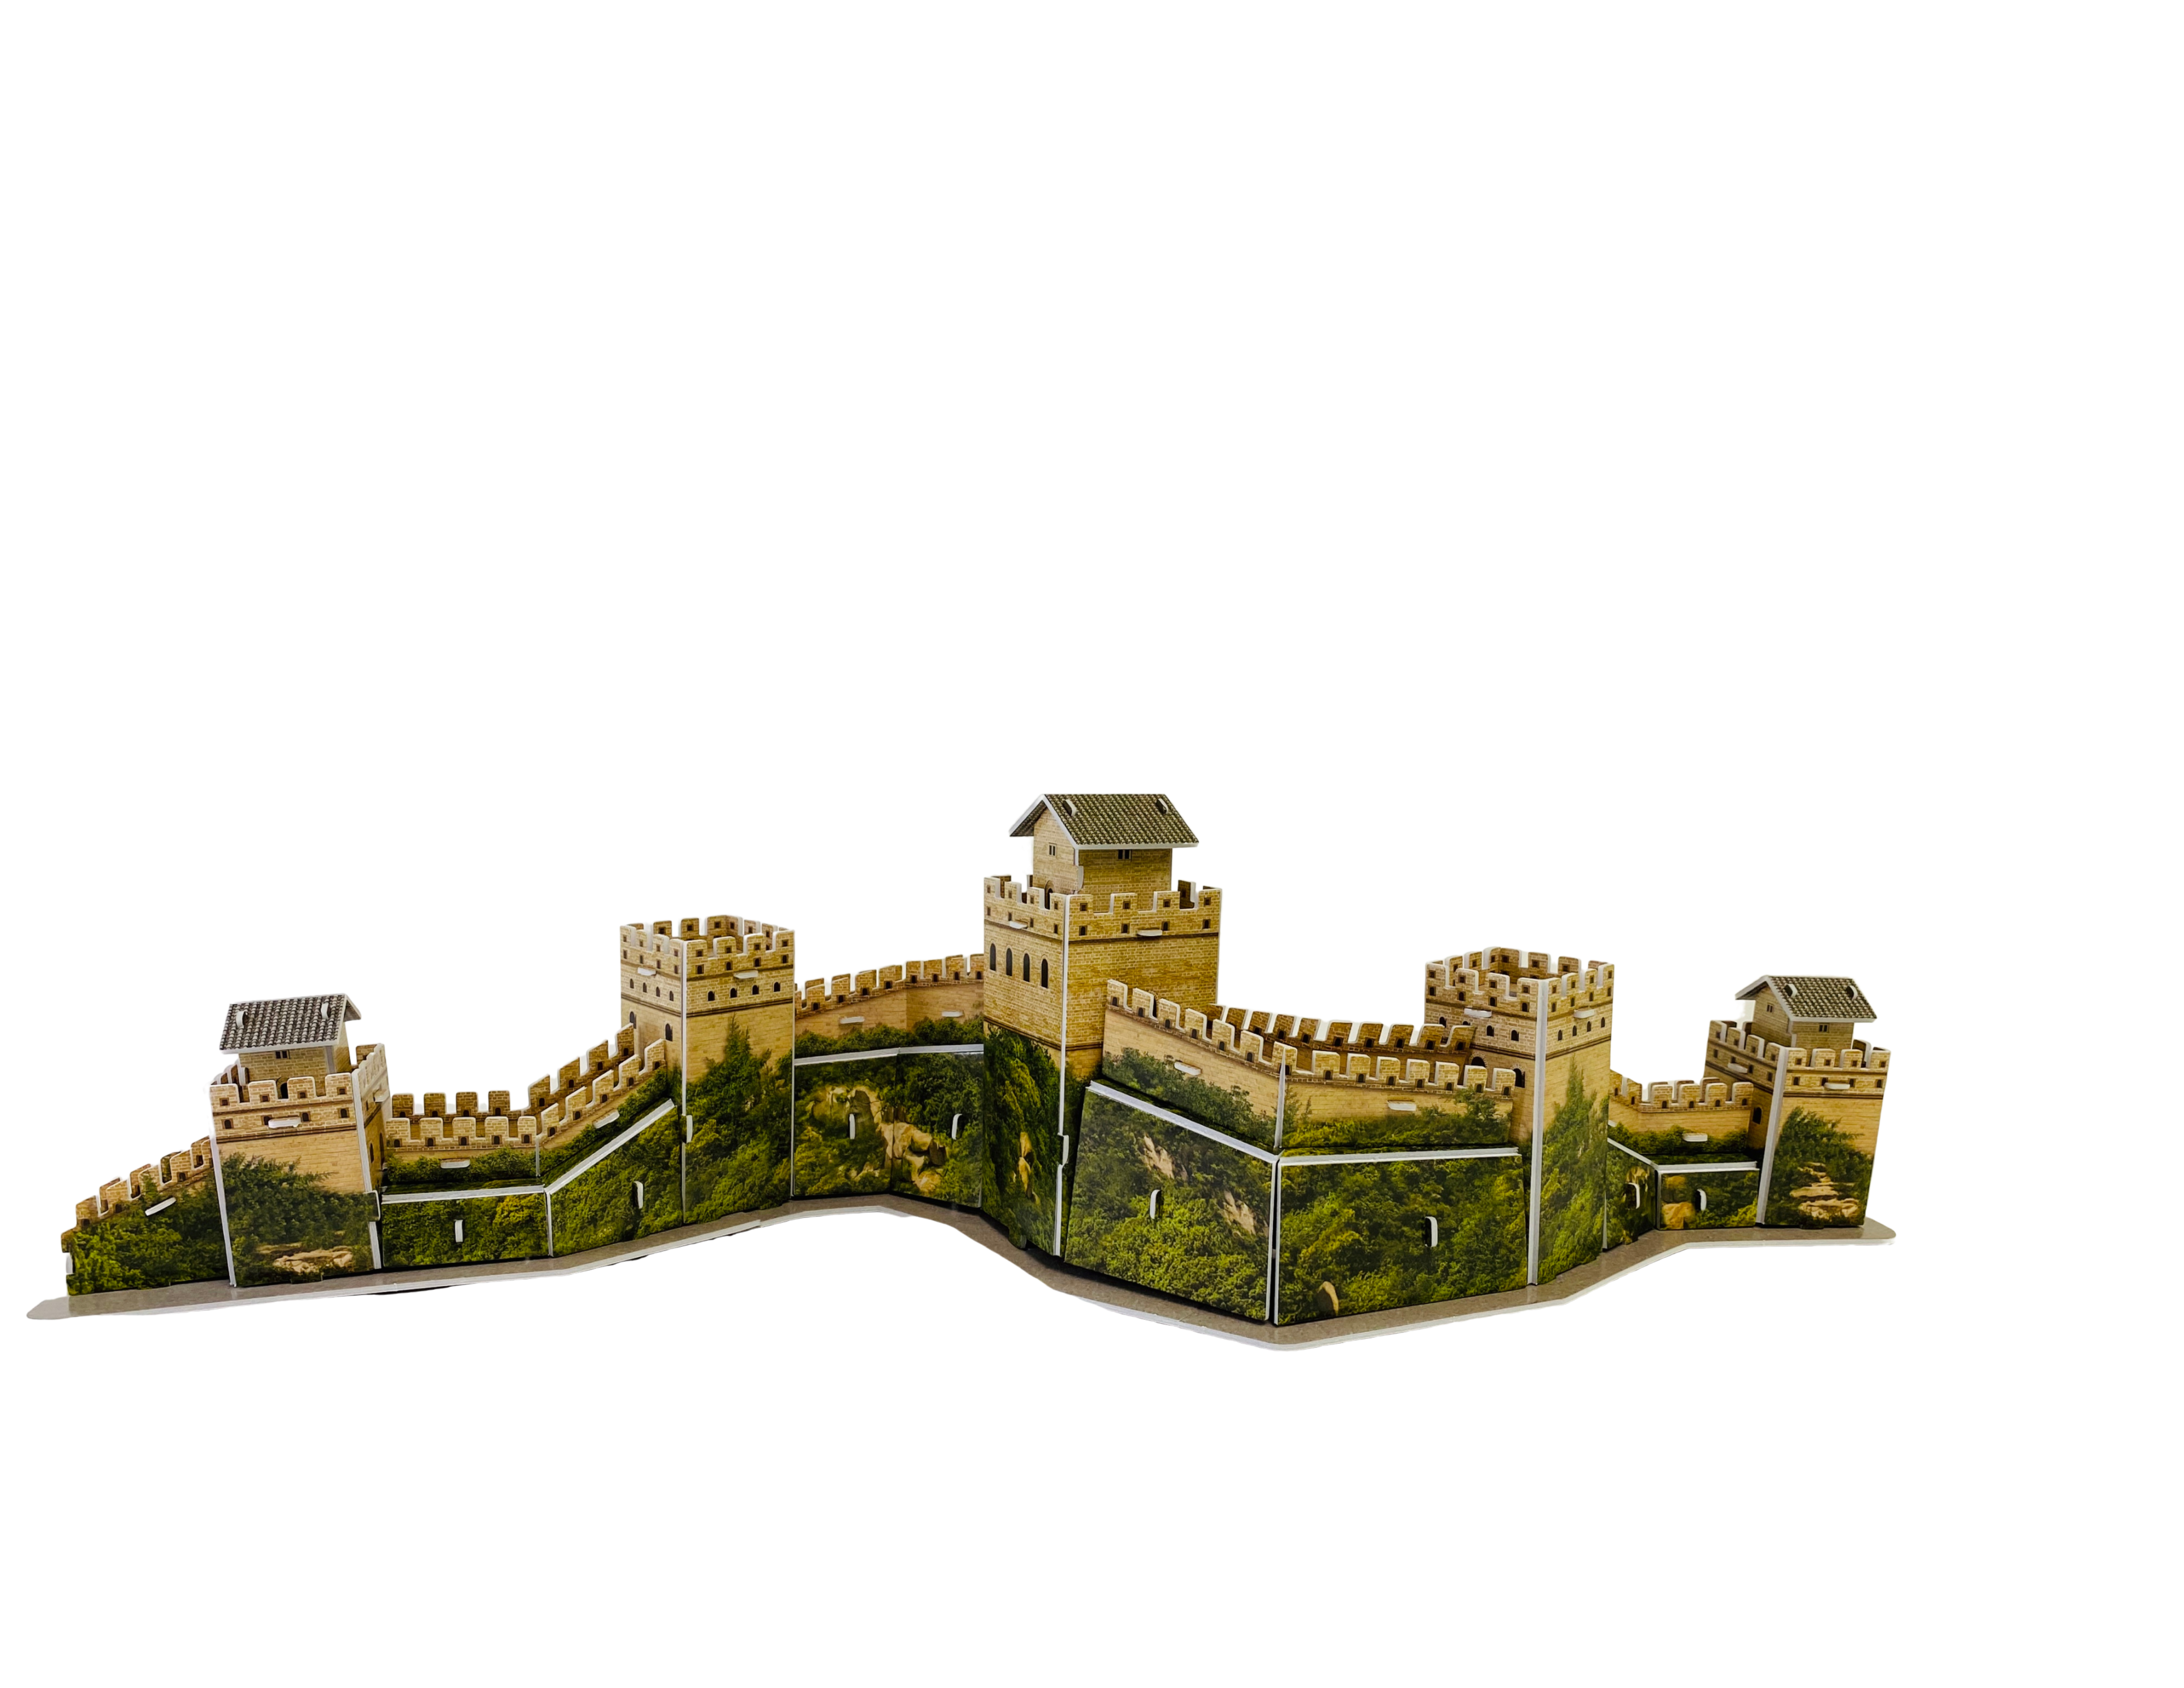 Little Learning Hands Great Wall of China 3D Puzzle | Great Wall of China Architecture Model Building Kit